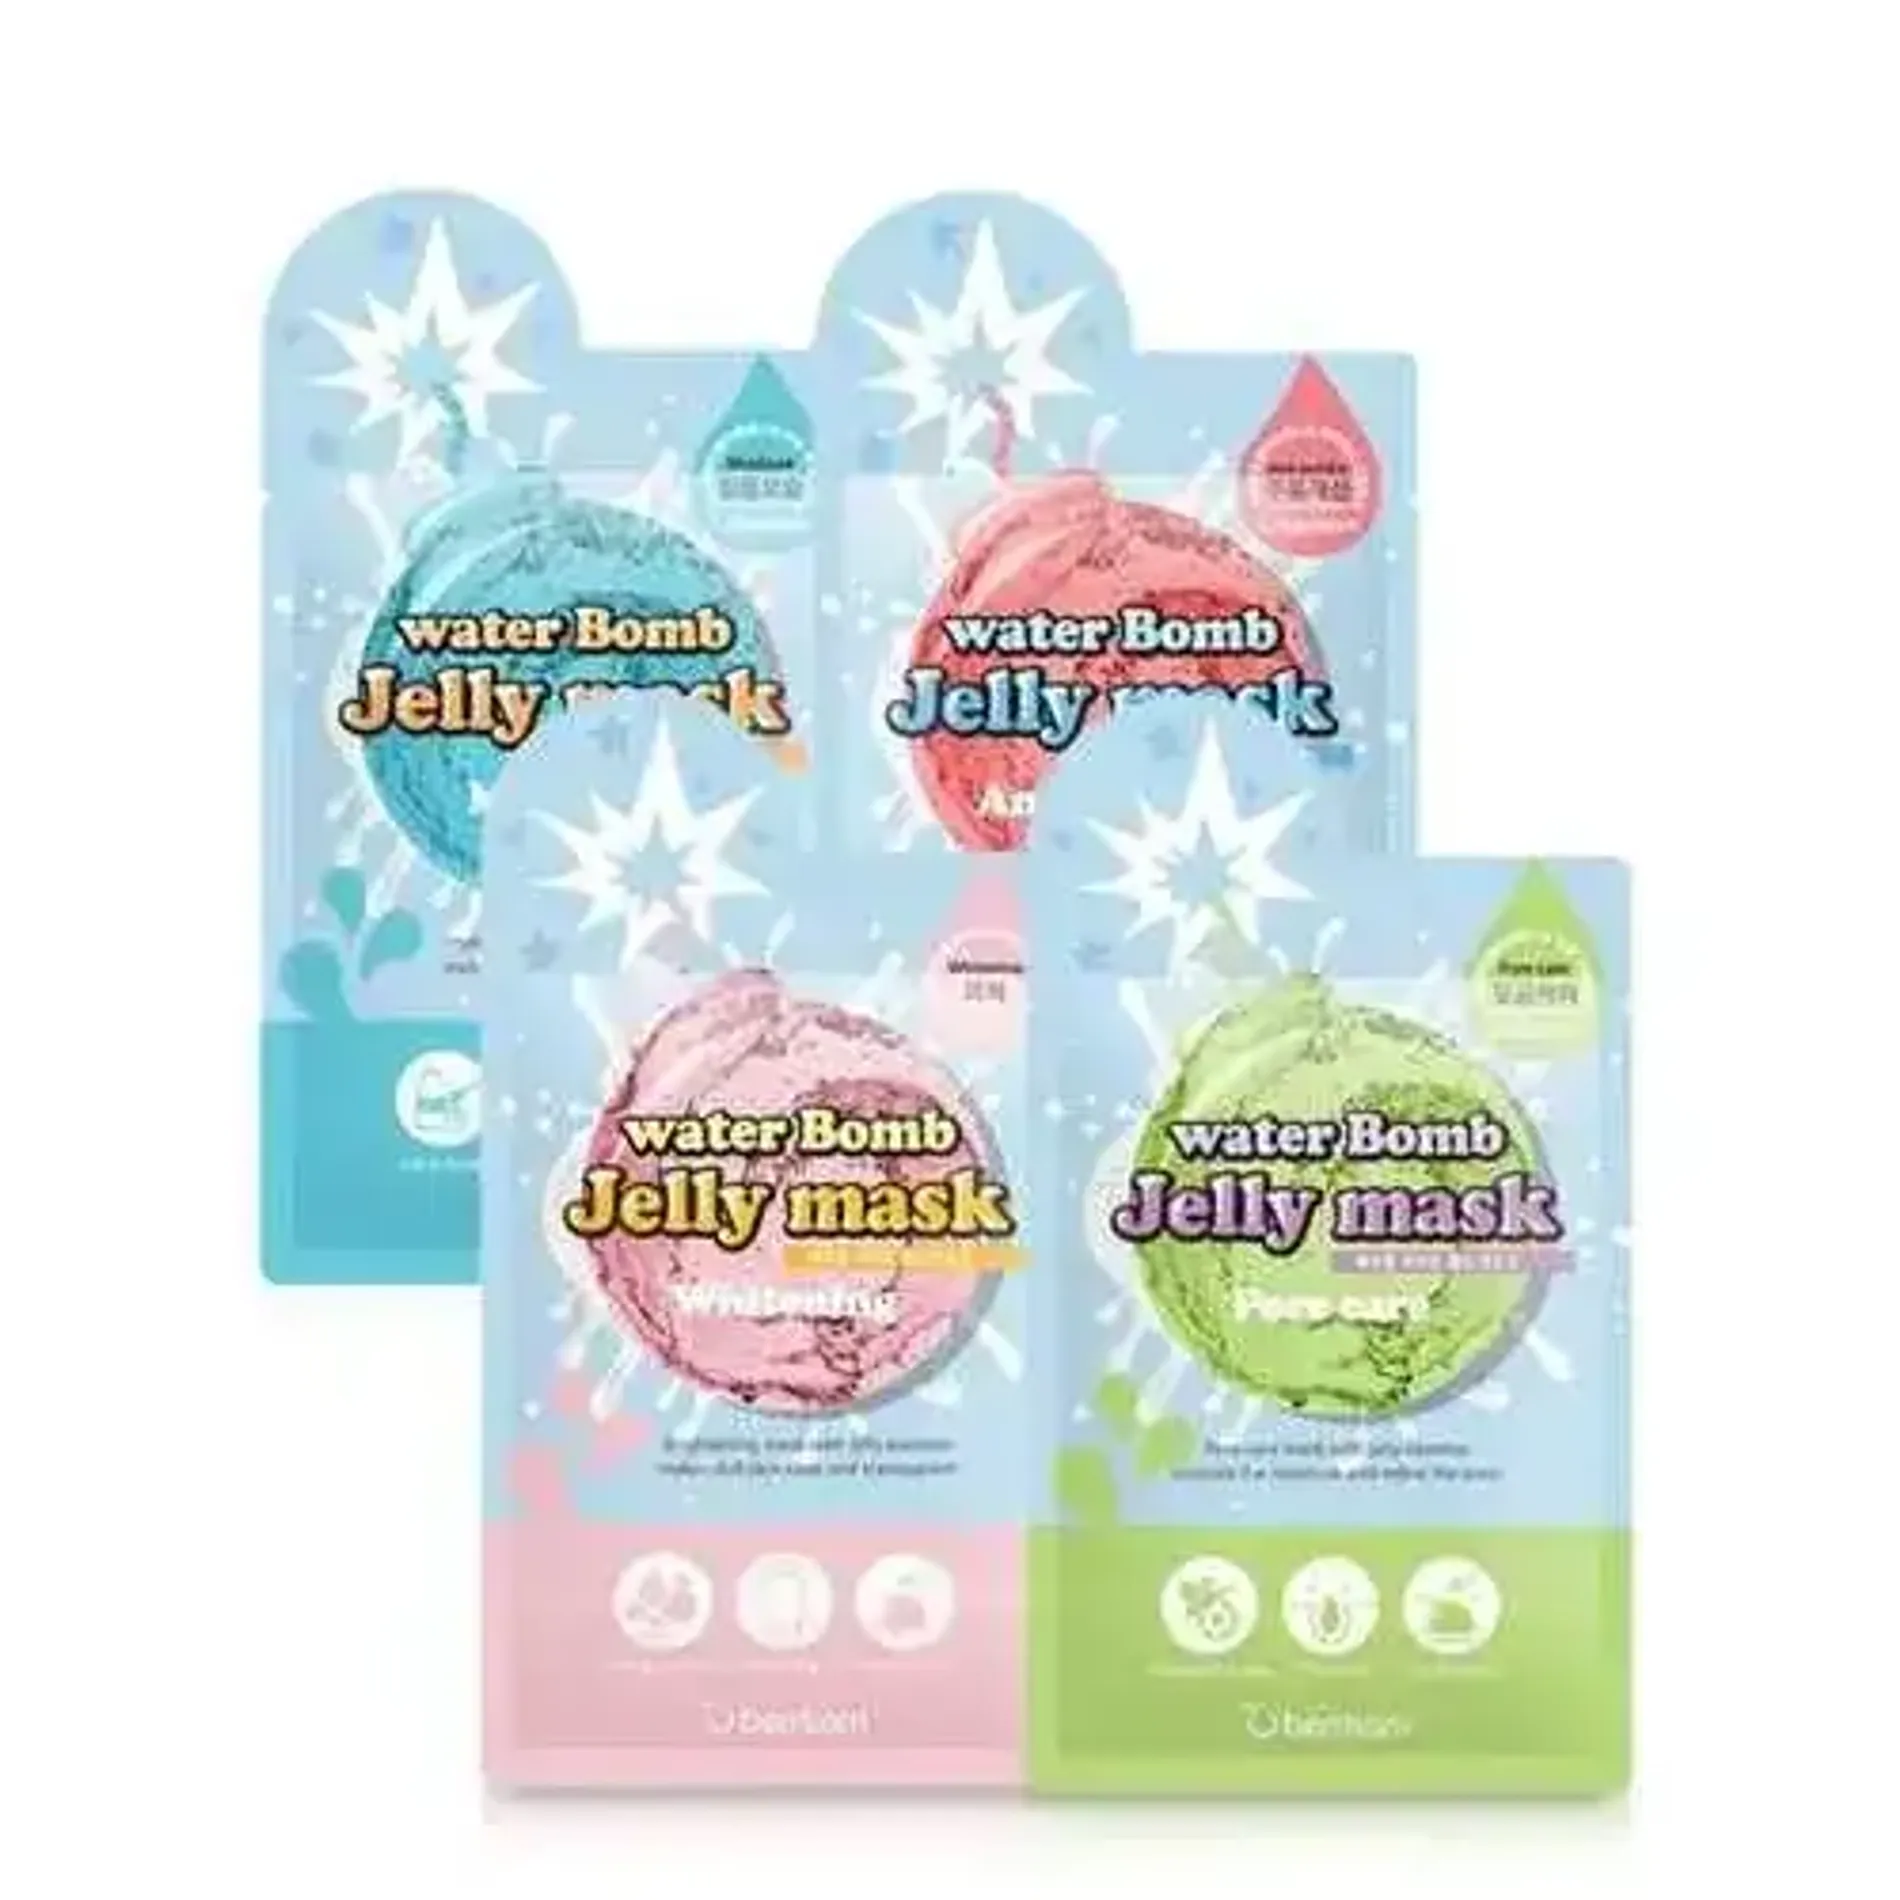 mat-na-giay-thanh-loc-lo-chan-long-berrisom-water-bomb-jelly-mask-04-pore-care-2